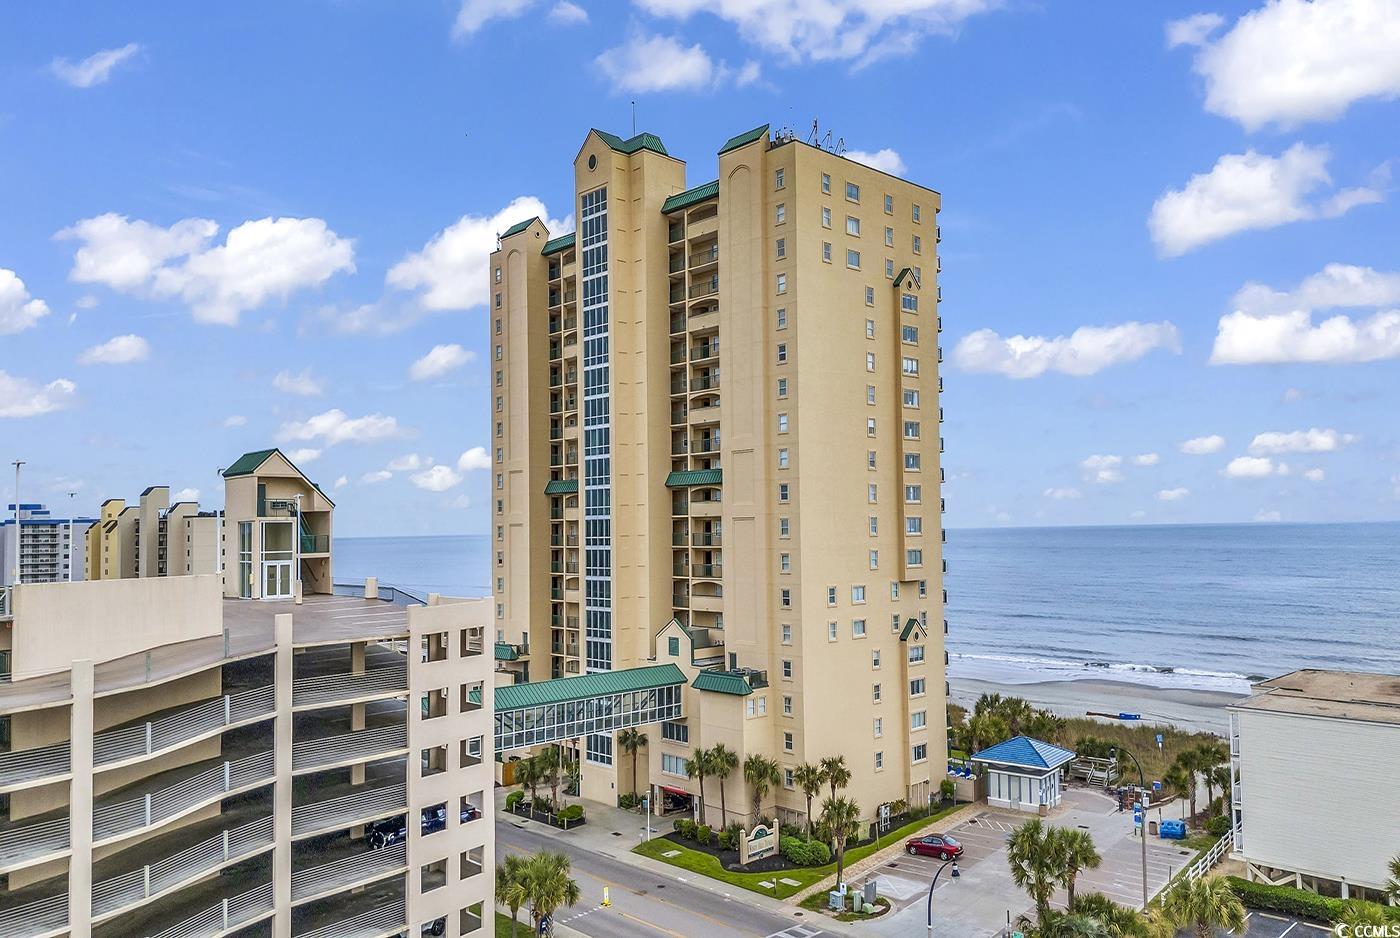 experience coastal luxury at its finest with this exquisite 3 bedroom 2 bath direct oceanfront condo located in the sought after windy hill section of north myrtle beach in windy hill dunes.  boasting panoramic views of the sparkling atlantic ocean, this meticulously maintained unit offers the perfect blend of comfort, style and convenience. as you step inside you will be captivated by the breathtaking vistas of endless sea visible from both the living area and primary bedroom. enjoy morning sunrises and evening breezes from your large balcony as you relax with family and friends, or retreat to the primary bedroom for a private seaside escape. the condo features new paint and furniture creating a fresh and inviting ambiance. whip up culinary delights in the well appointed full kitchen with ample storage space. for your convenience, a washer and dryer are in the unit ensuring effortless beach living. outside indulge in resort-style  amenities, including an oceanfront saltwater pool, lazy river, kiddie pool, hot tub all which provide endless entertainment for all ages. host unforgettable cookouts in the oceanfront grilling area featuring green egg or stay active in the exercise room. for added convenience, the condo includes an 8 level parking garage connected by an enclosed climate controlled walkway, ensuring hassle free arrivals and departures. explore the vibrant surroundings with easy access to golf courses, dining establishments, fishing charters, boating excursions and world-class entertainment options. with its million dollar view and unbeatable location just steps away from the soft sands of  the grand strand and atlantic ocean, this oceanfront oasis presents a rare opportunity to  own a piece of paradise in one of the most coveted destinations on the east coast.